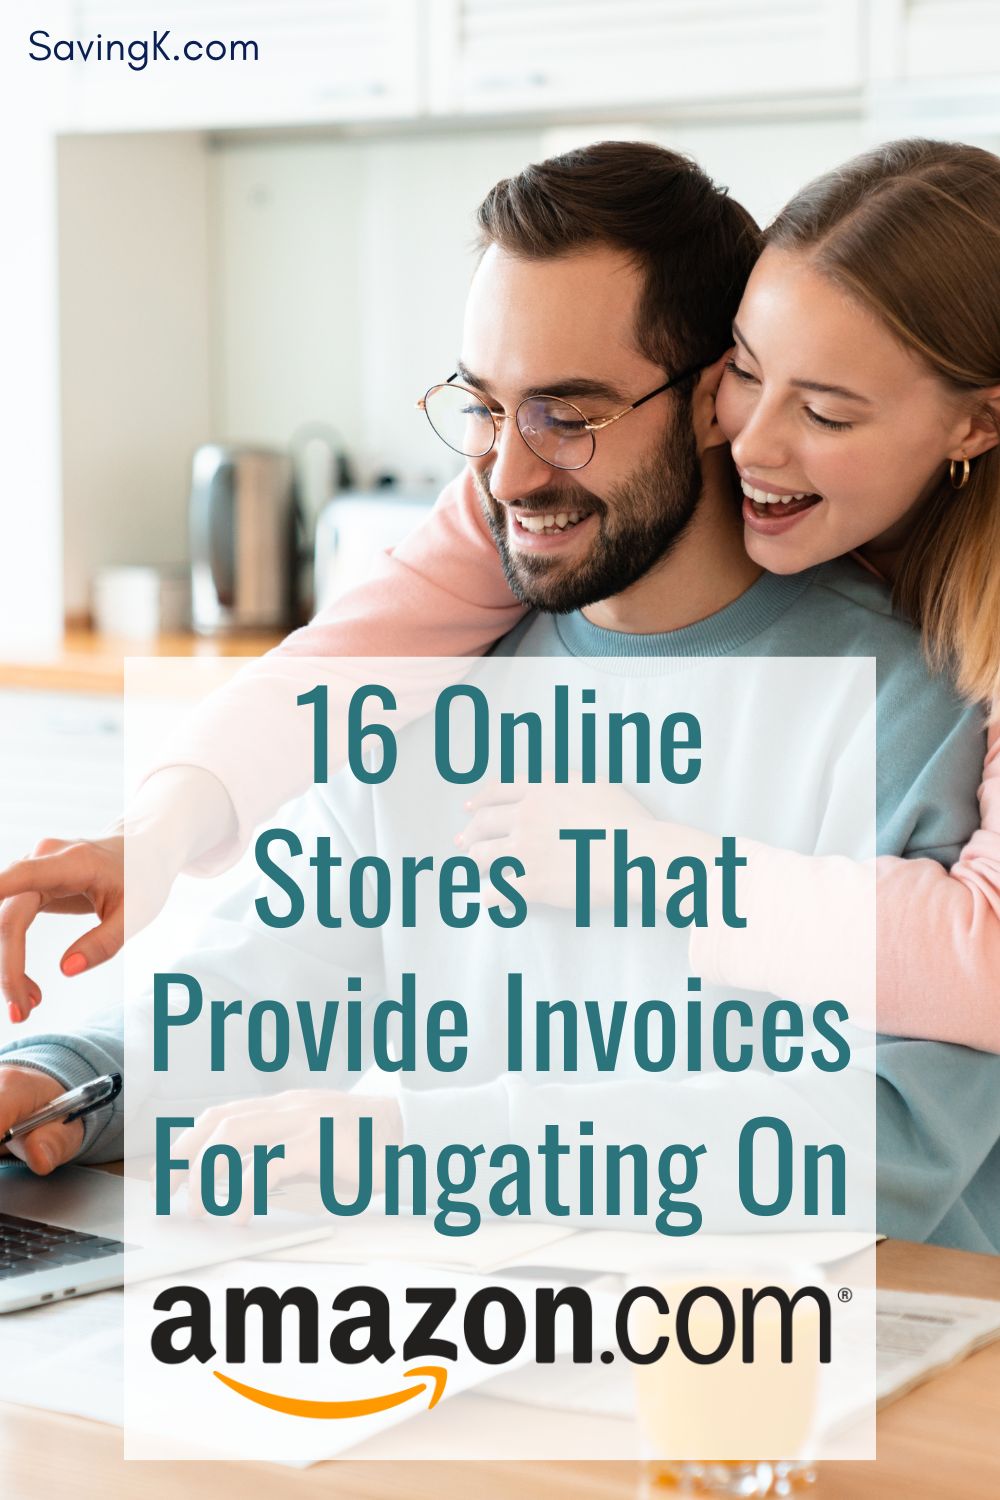 Online Stores That Provide Invoices For Ungating On Amazon